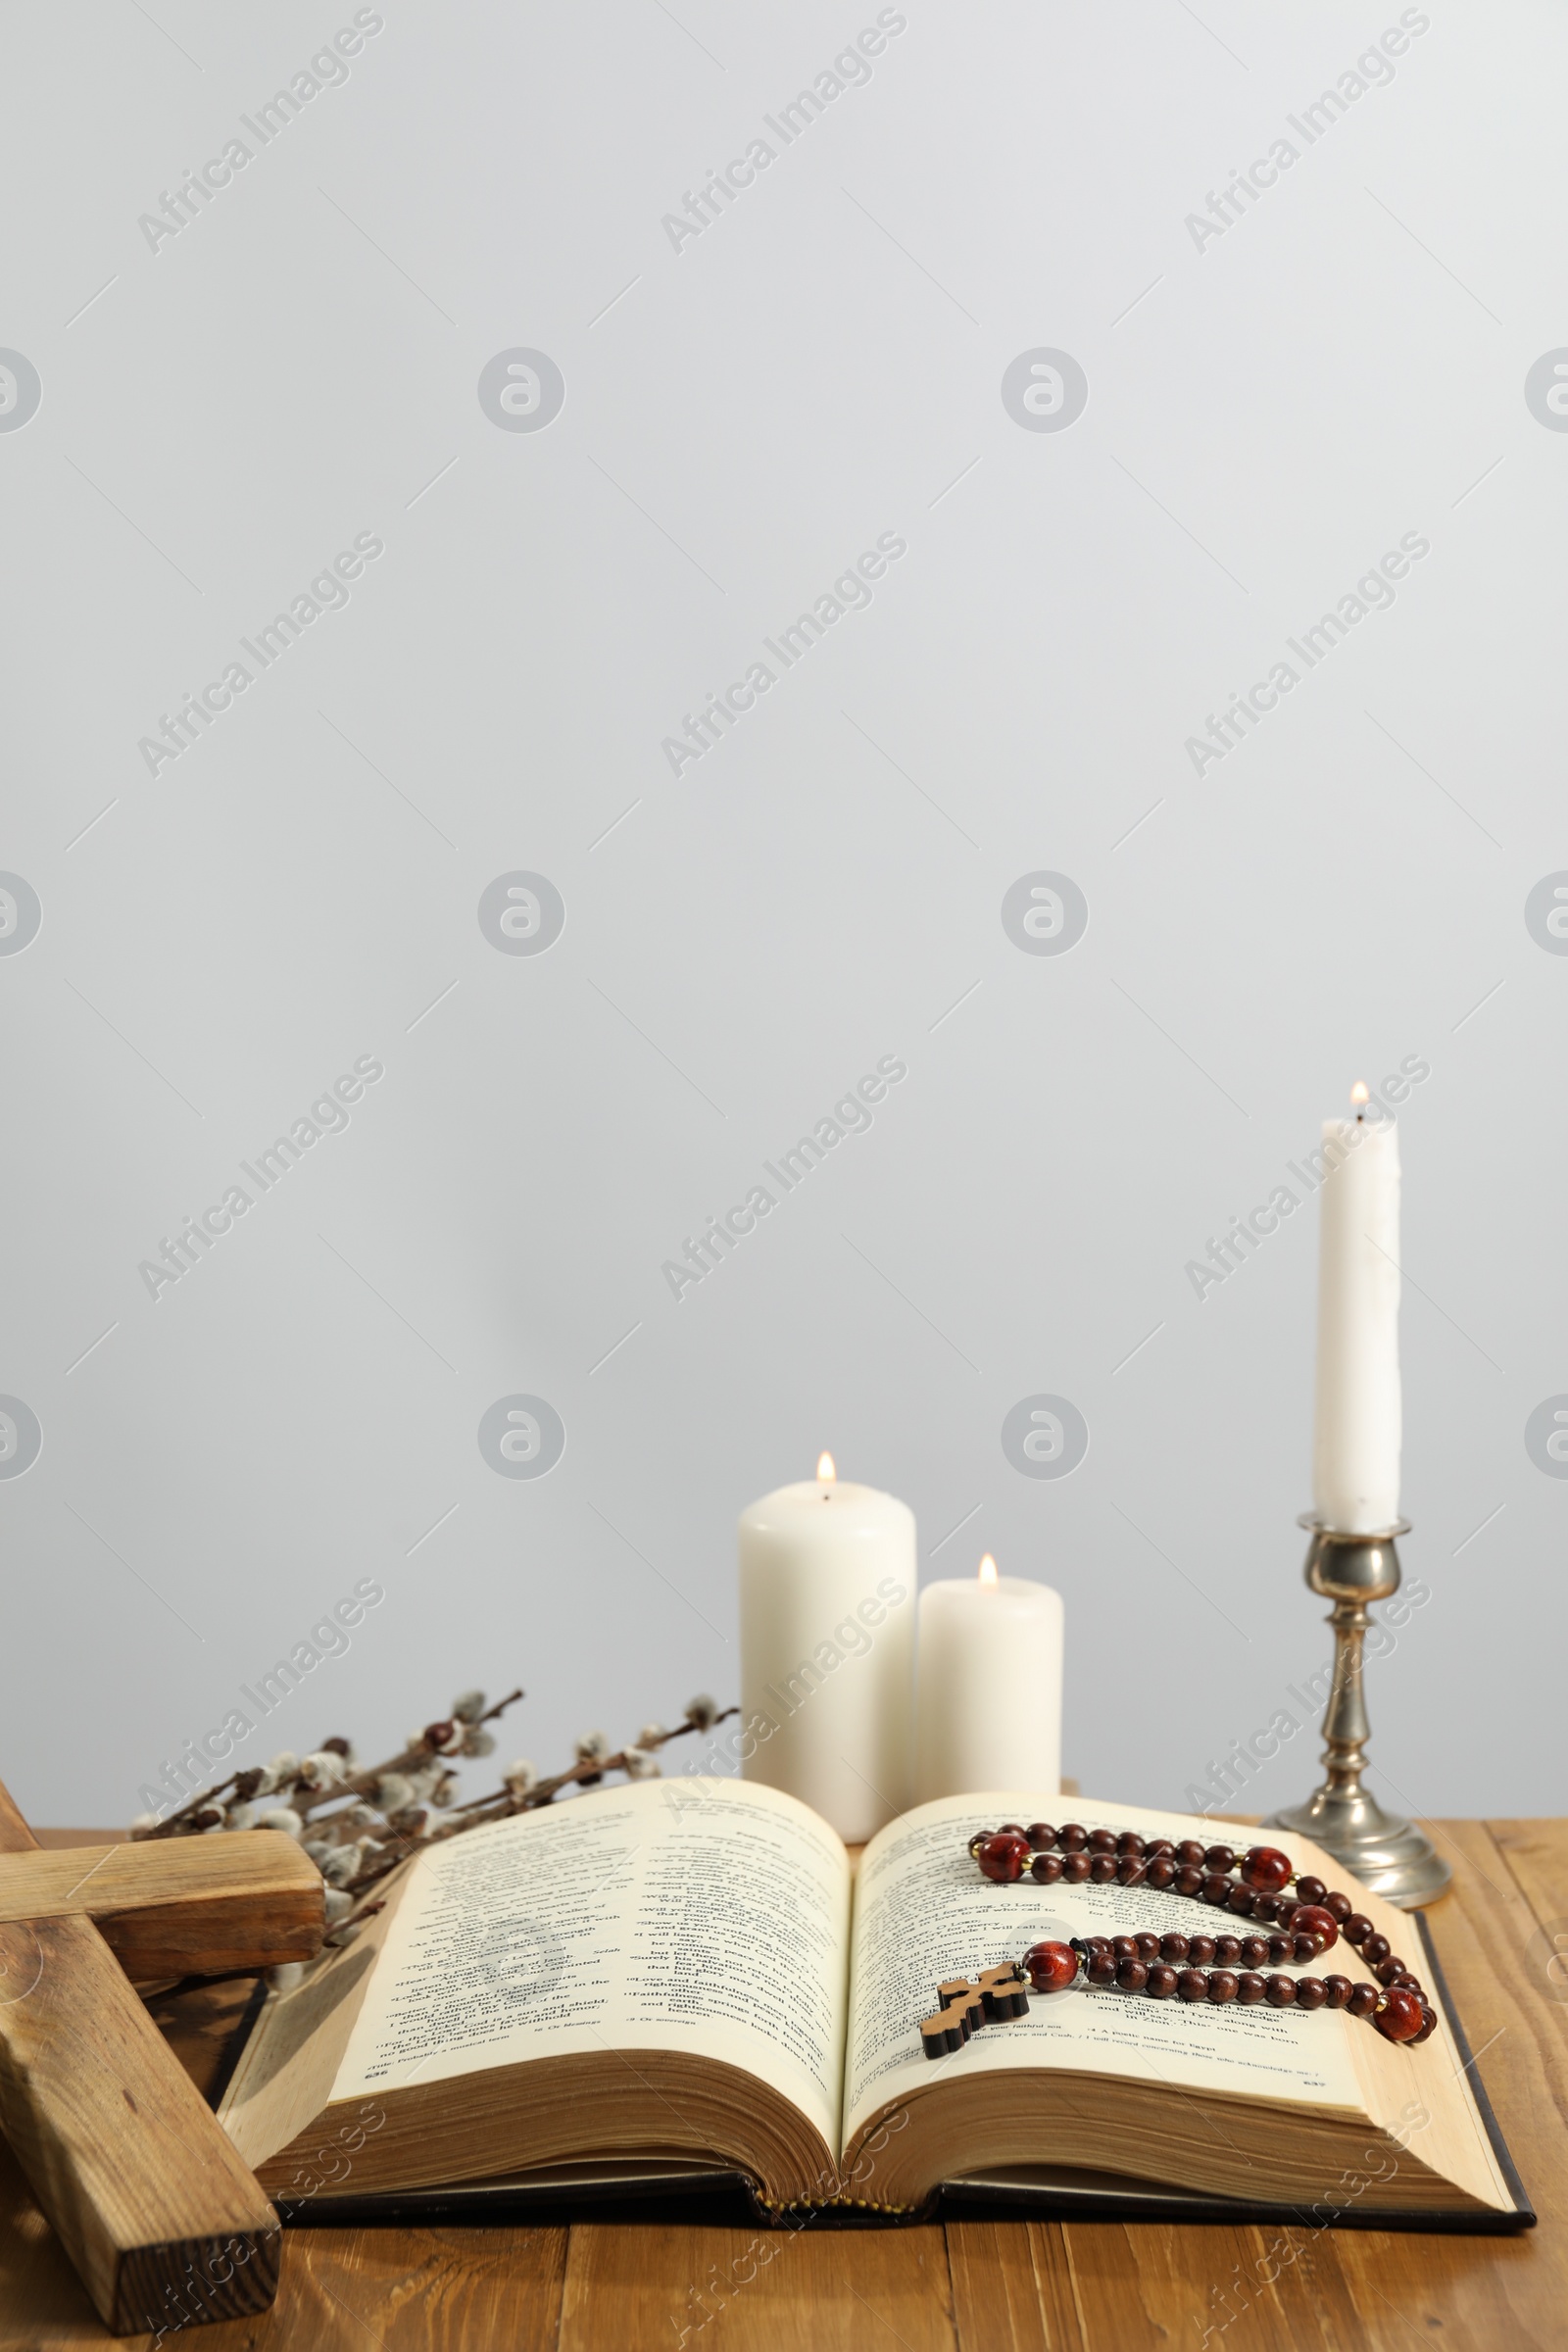 Photo of Church candles, cross, rosary beads, Bible and willow branches on wooden table against light background. Space for text